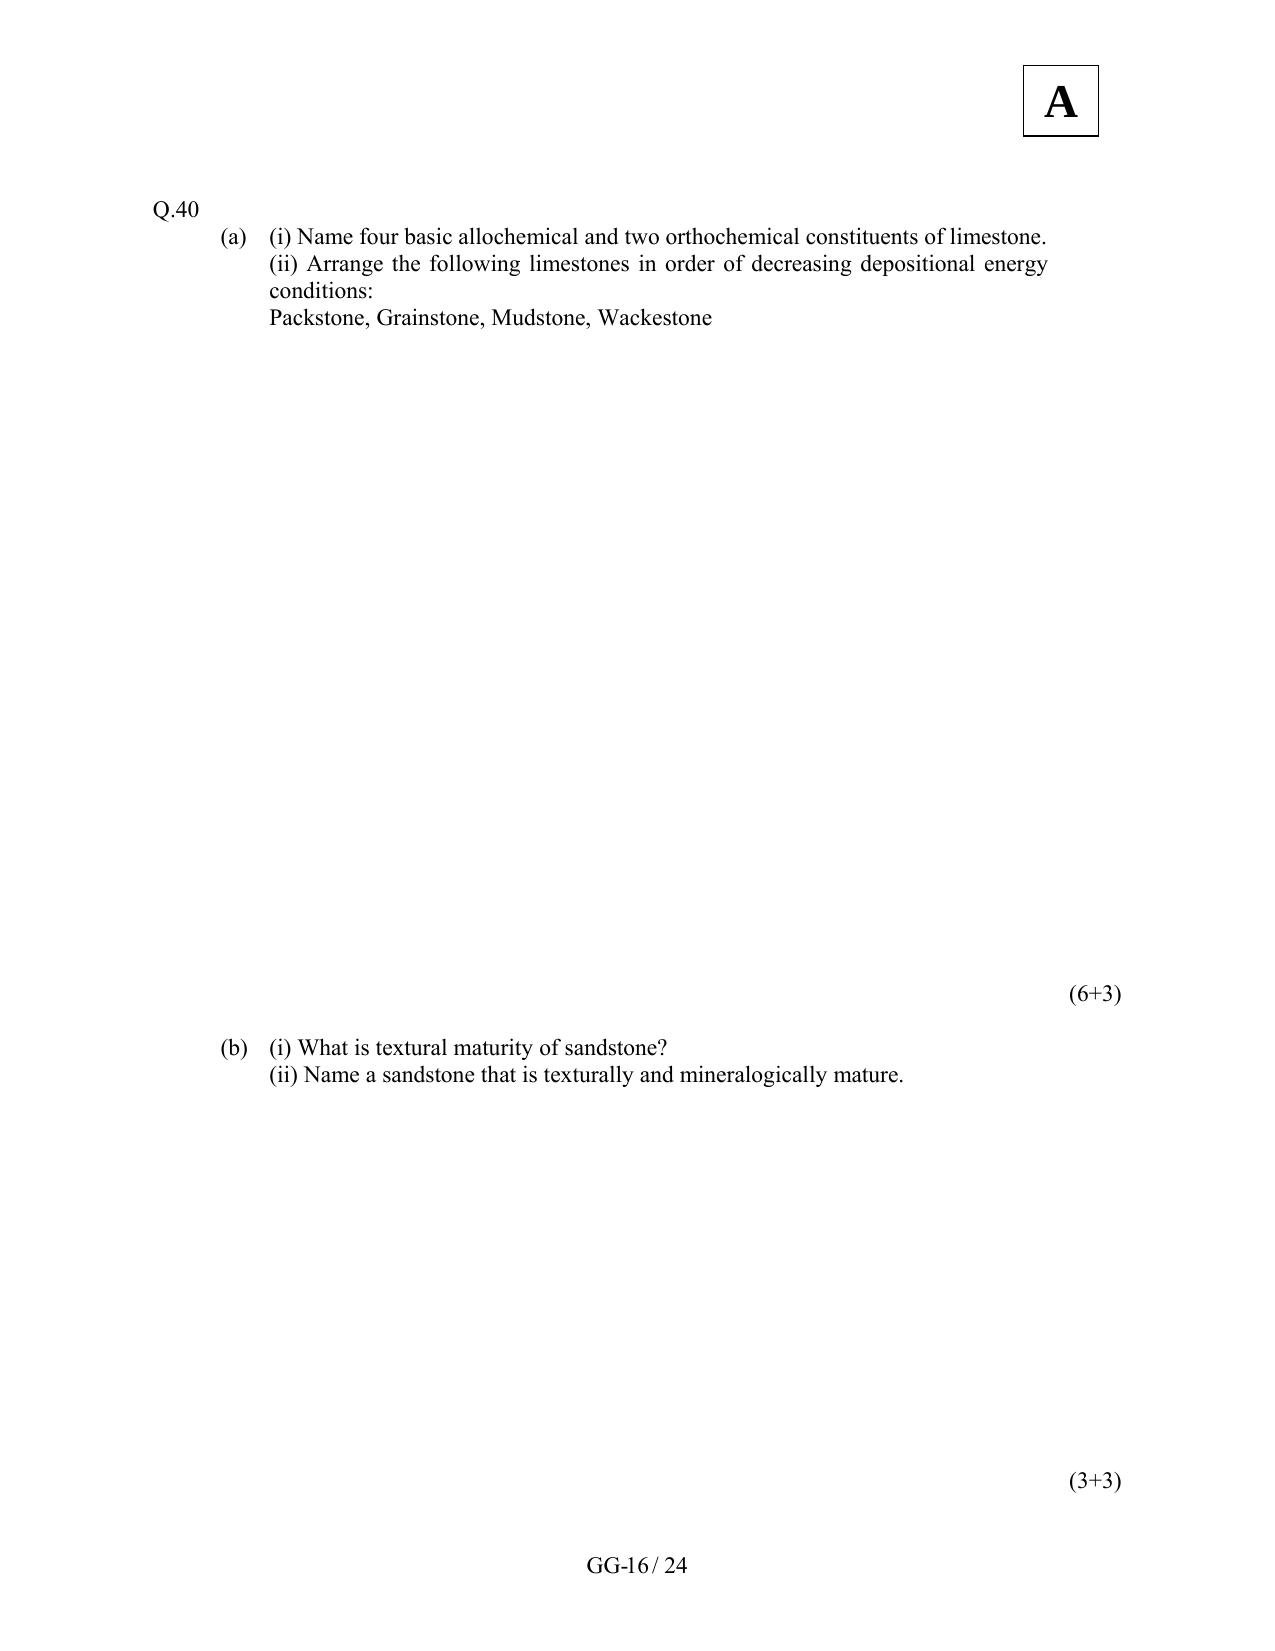 JAM 2012: GG Question Paper - Page 18